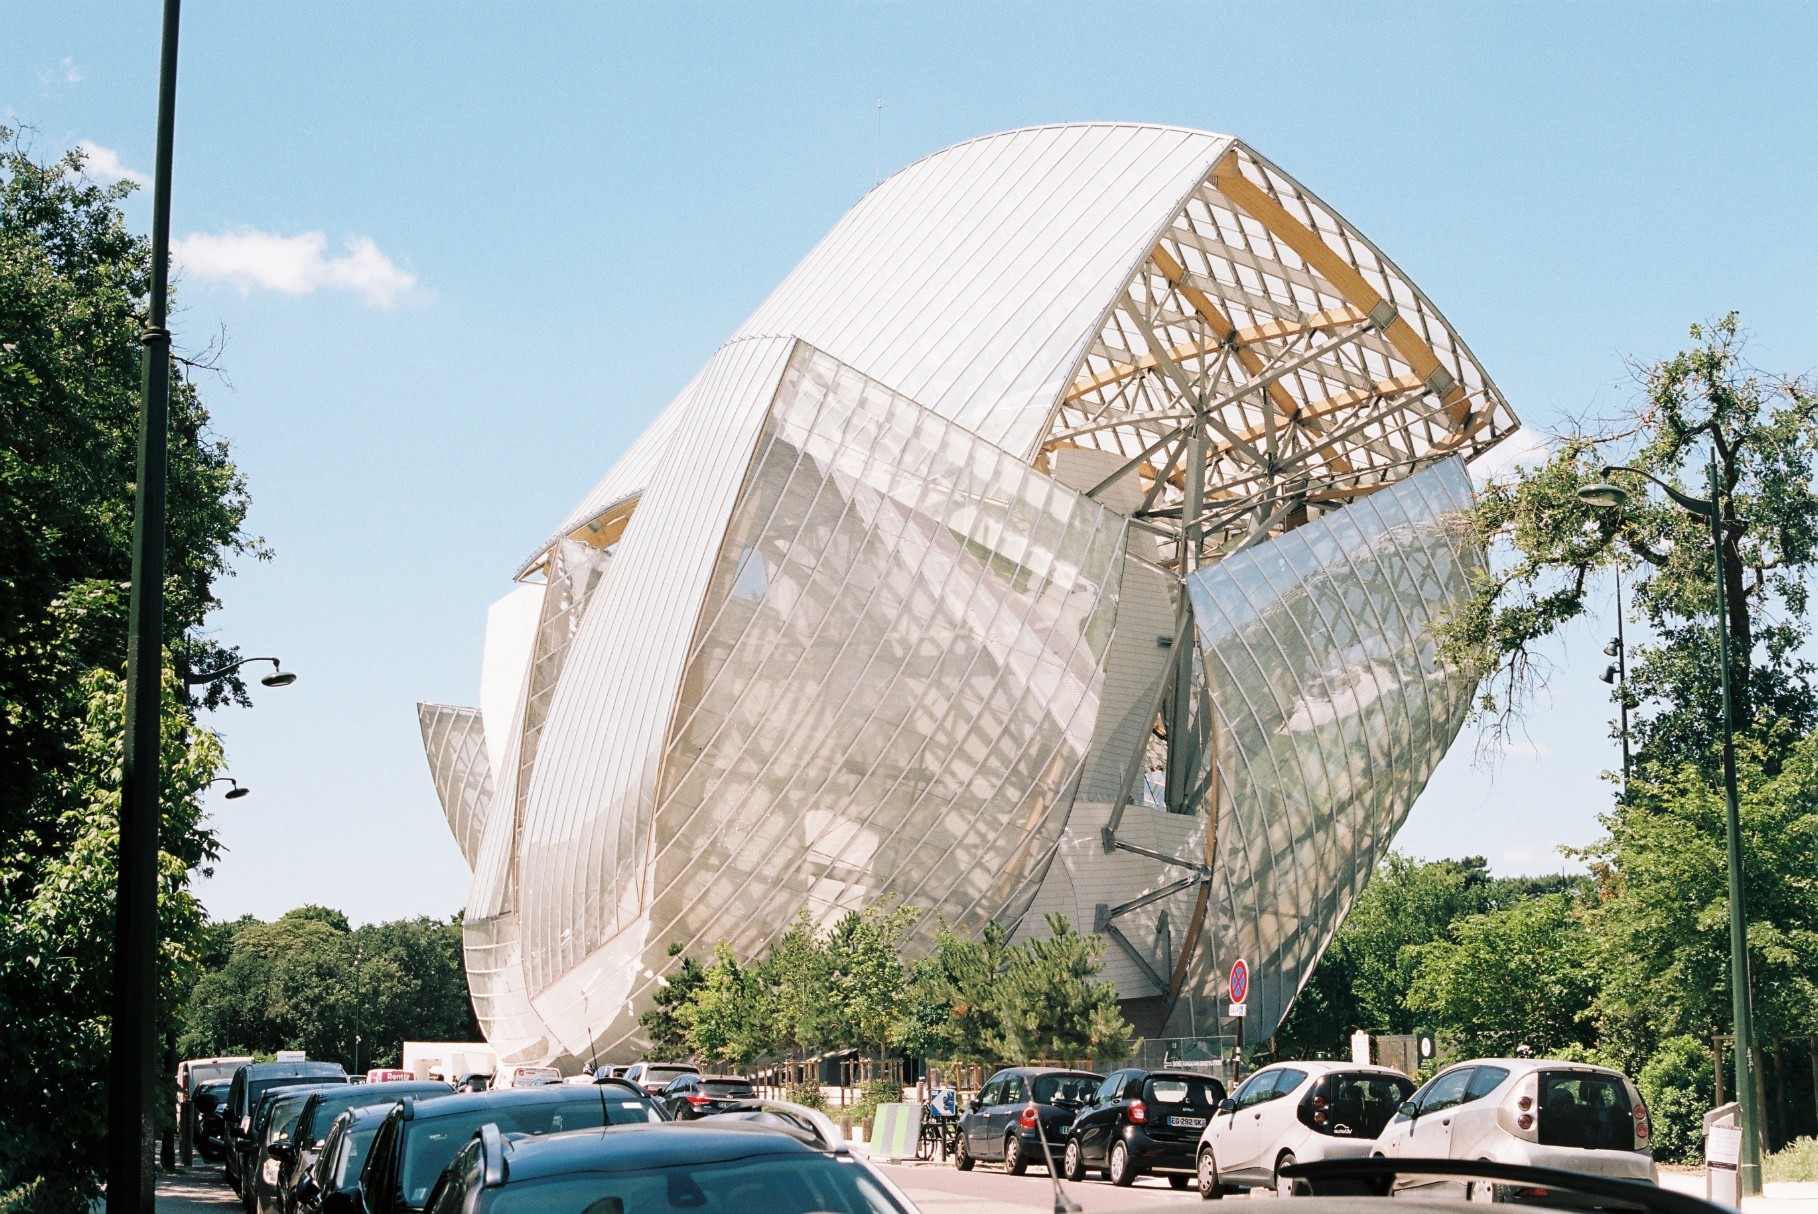 Architecture: the Louis Vuitton Foundation is no exception to the